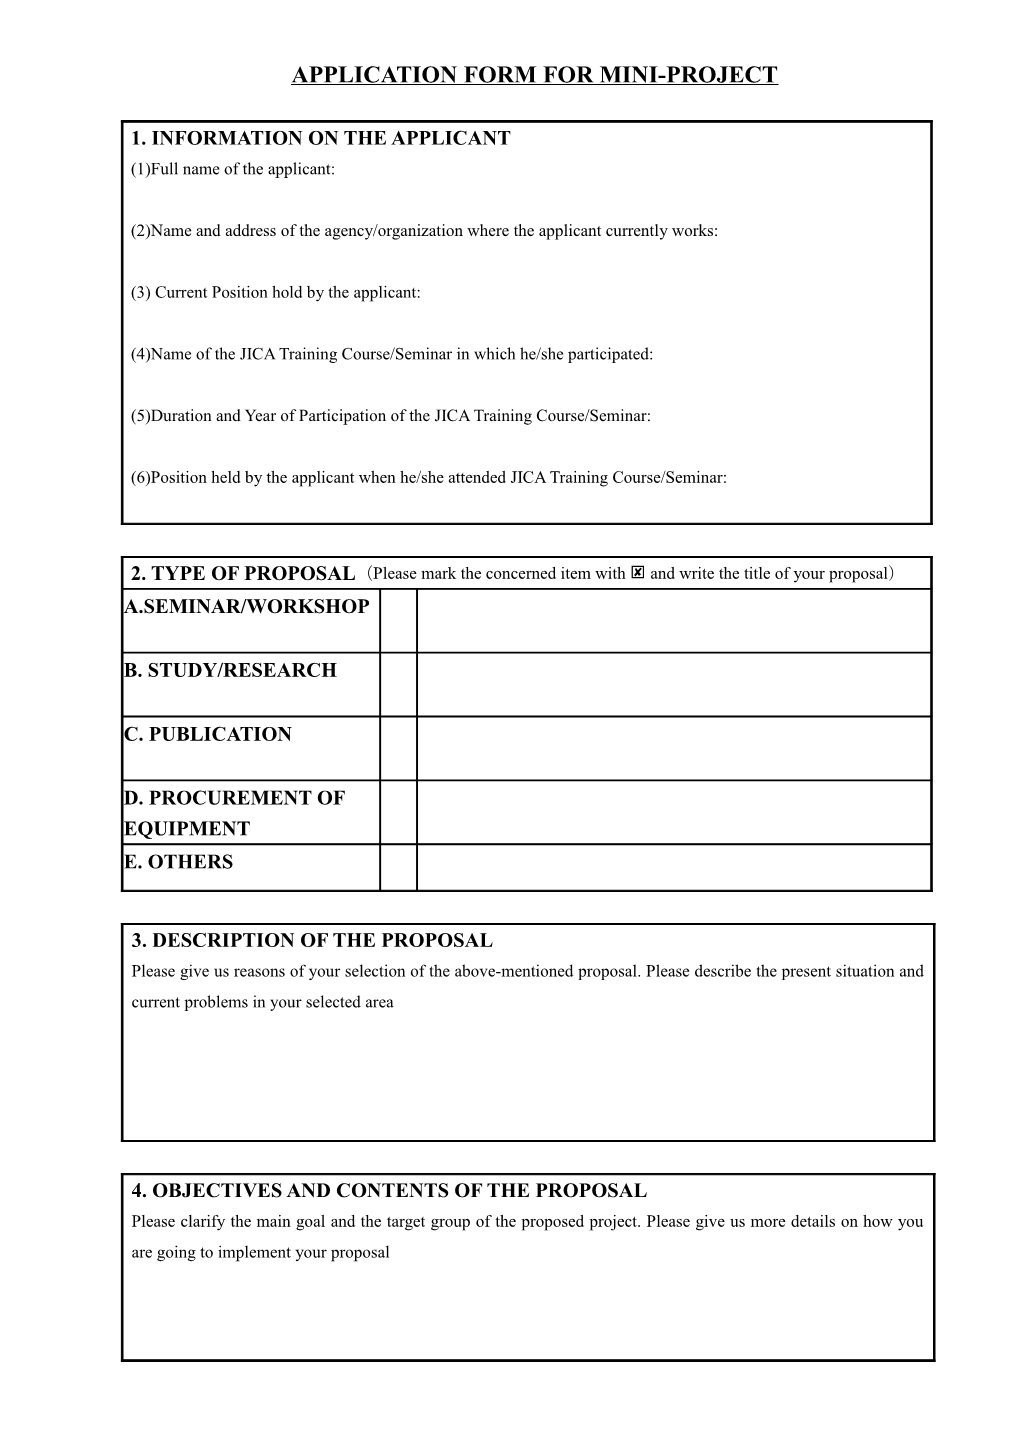 Application Form for Mini-Project